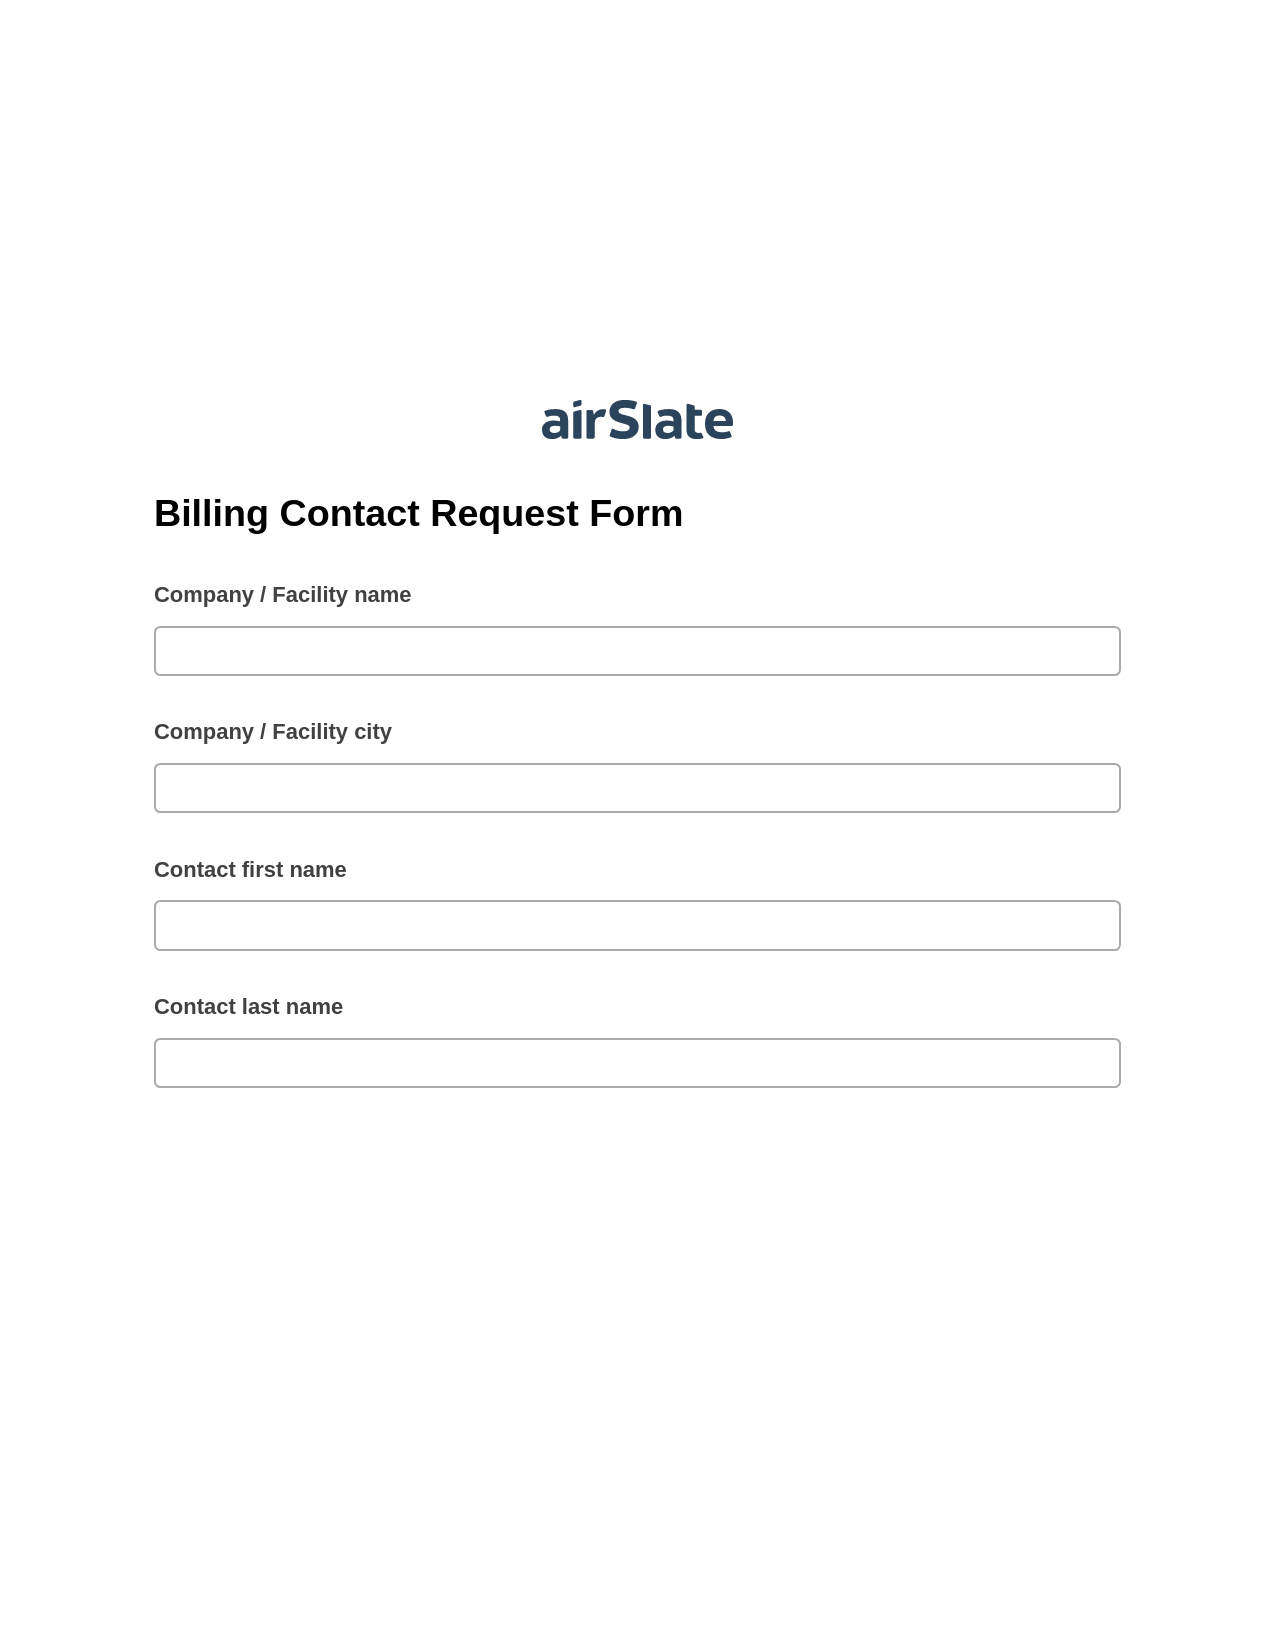 Multirole Billing Contact Request Form Pre-fill Dropdowns from Google Sheet Bot, Unassign Role Bot, Email Notification Postfinish Bot